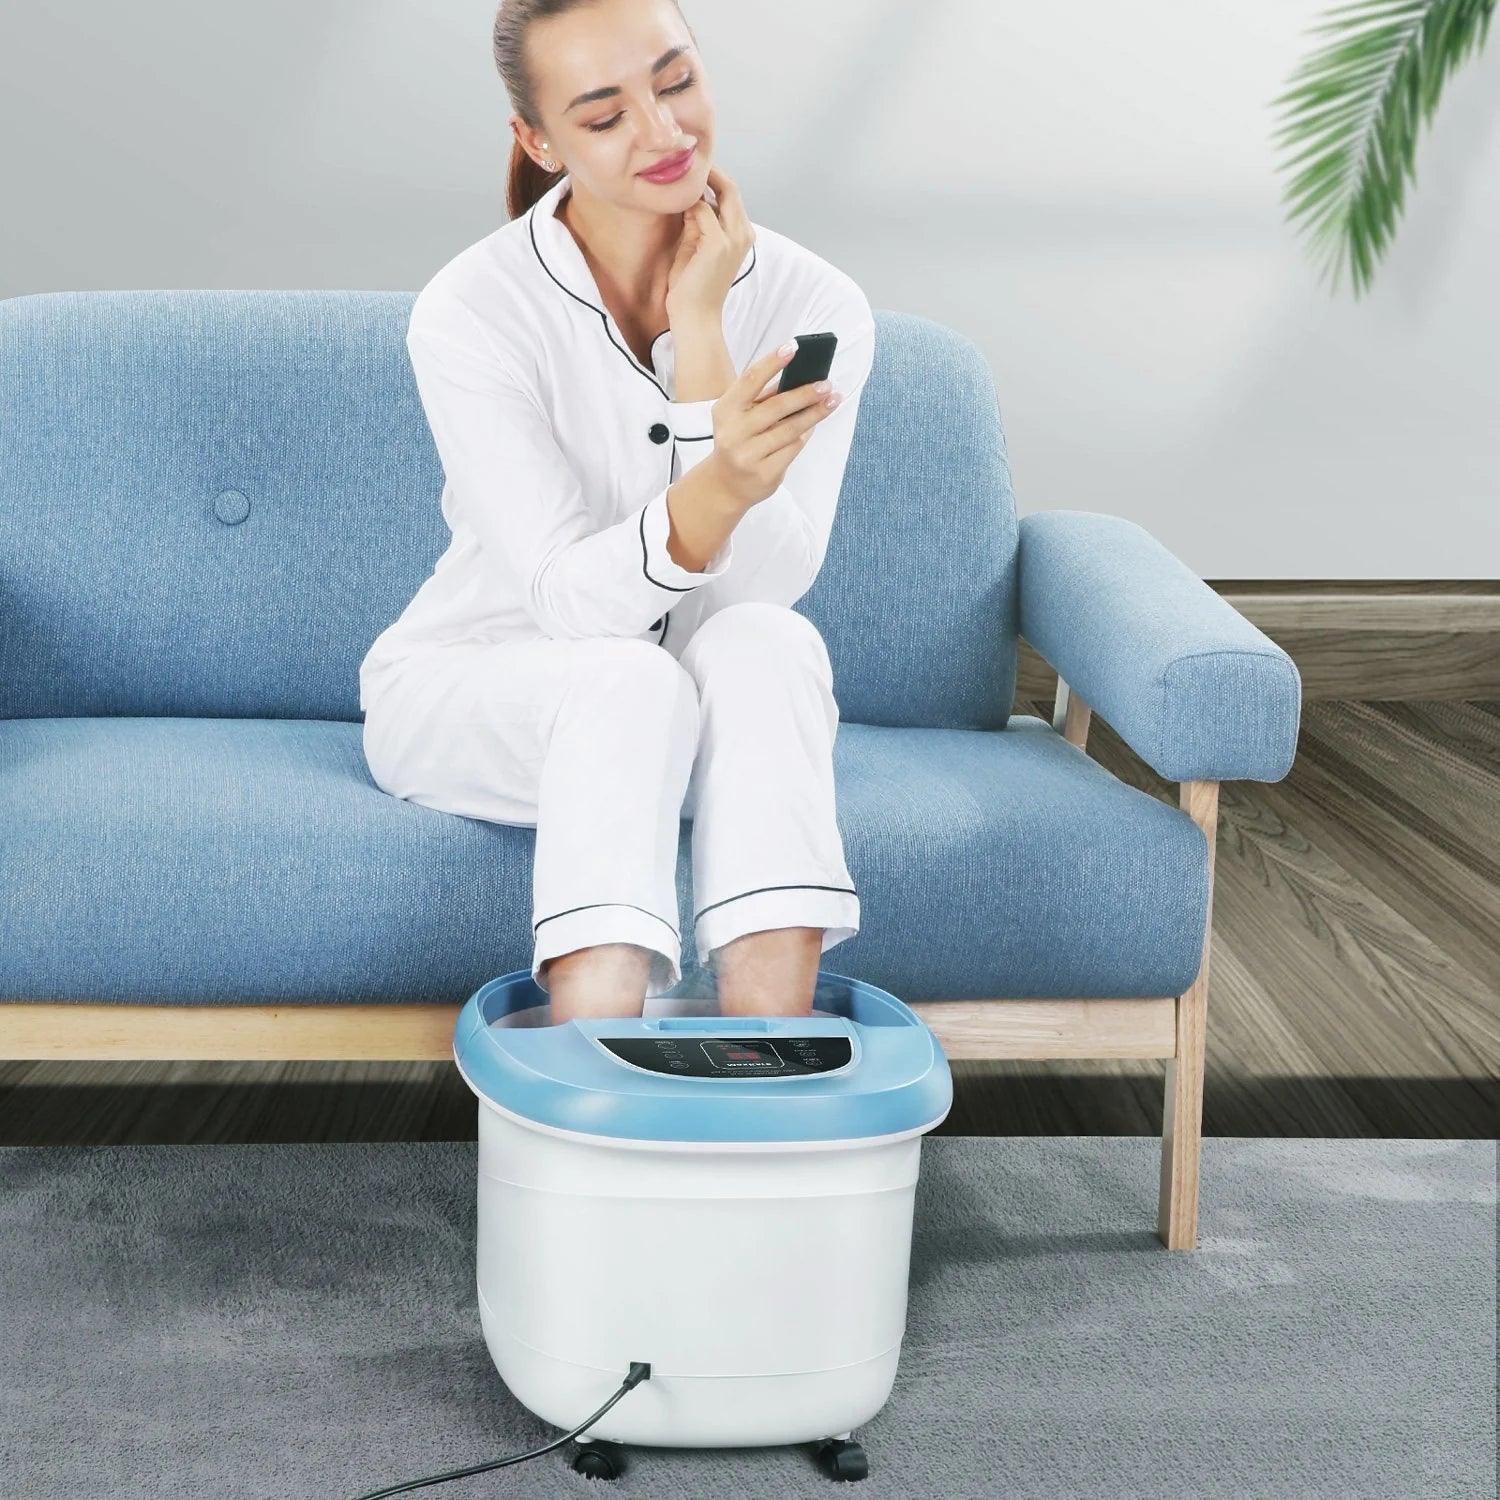 Foot Spa Bath Massager with Heat Vibration and Tempreture and Time Setting 13482759 - YOURISHOP.COM